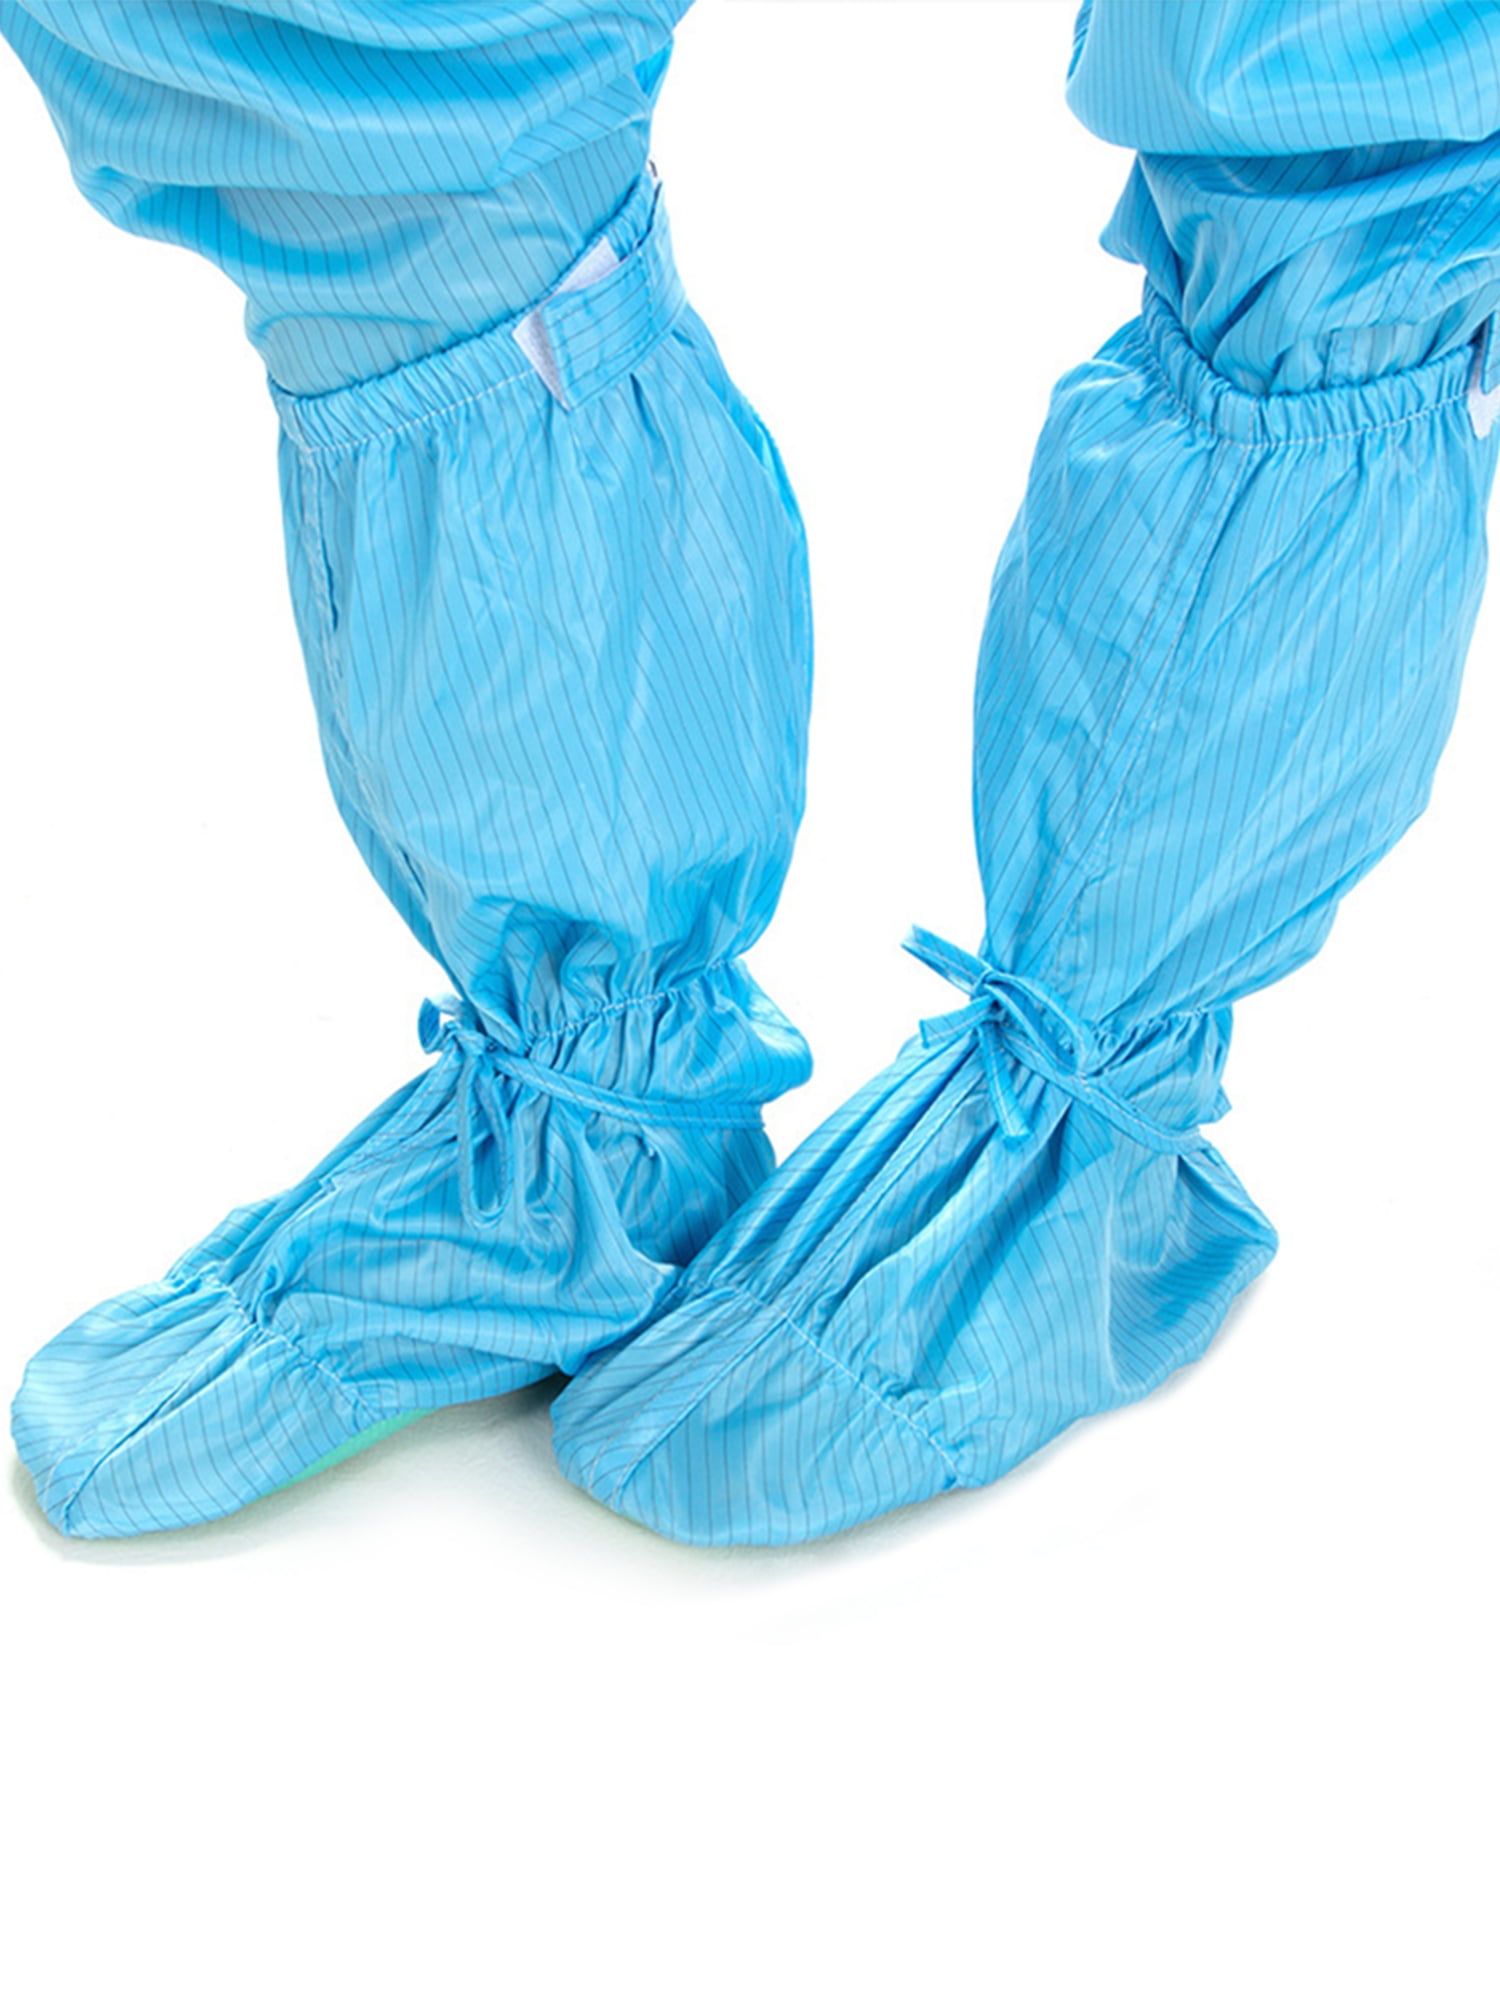 Details about   10-100Pair Disposable Shoe Covers Waterproof Long Boots Cover Non-Slip Overshoes 